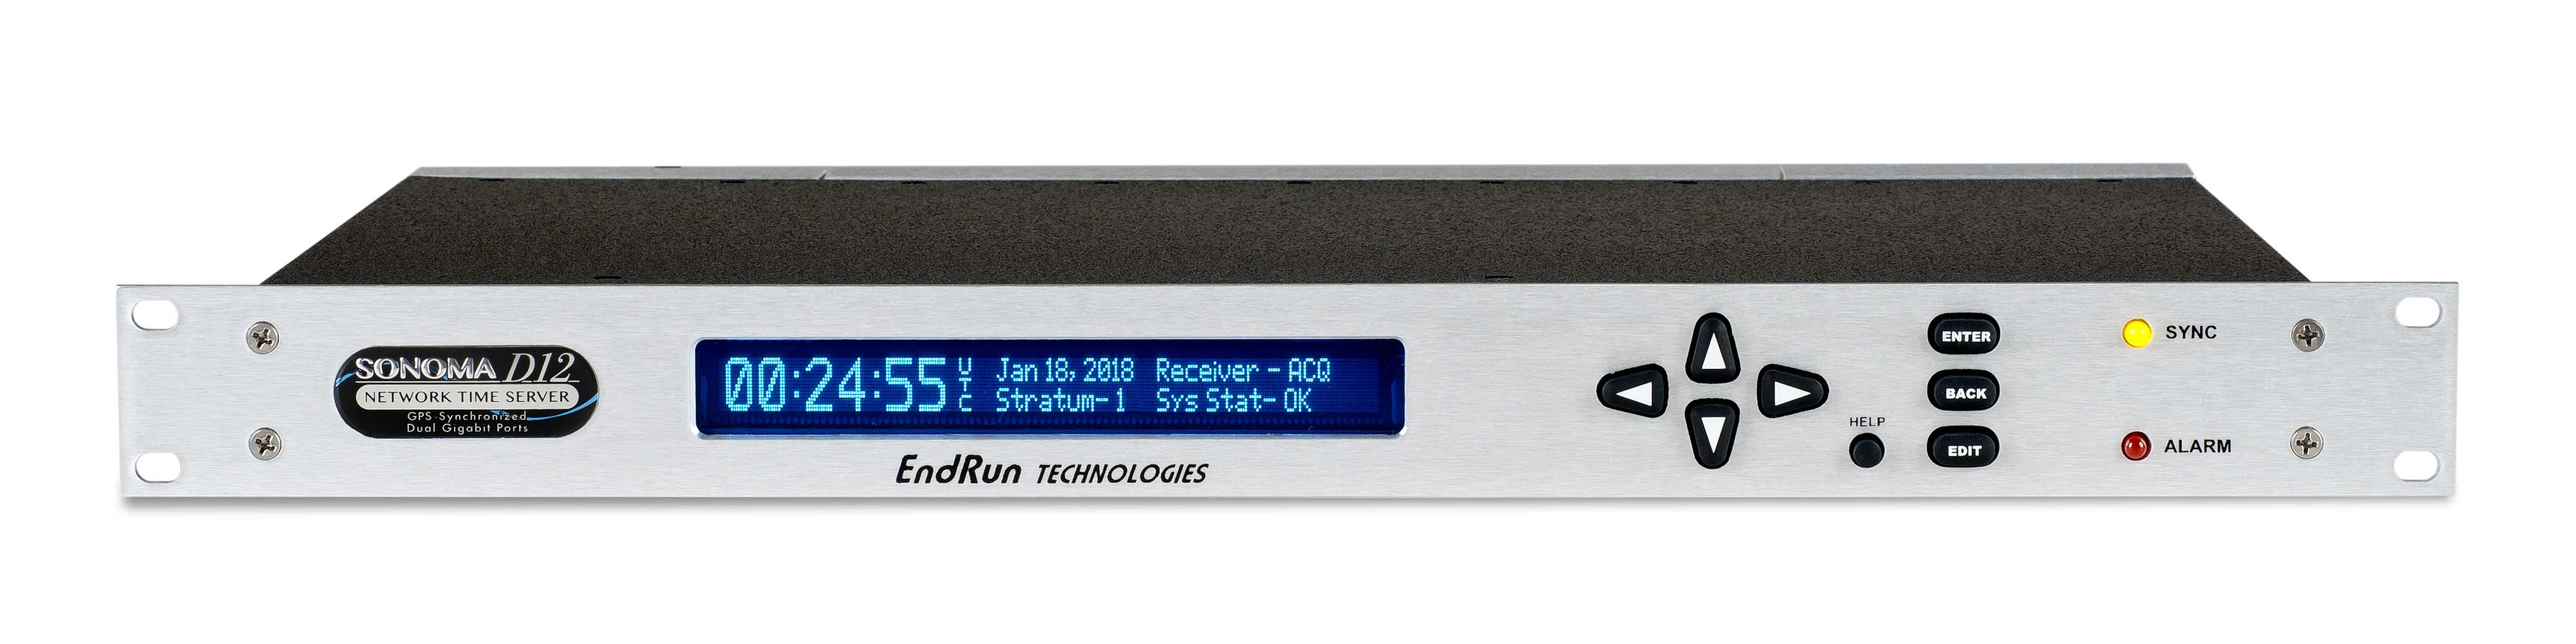 Sonoma GPS D12 Network Time Server Front Panel